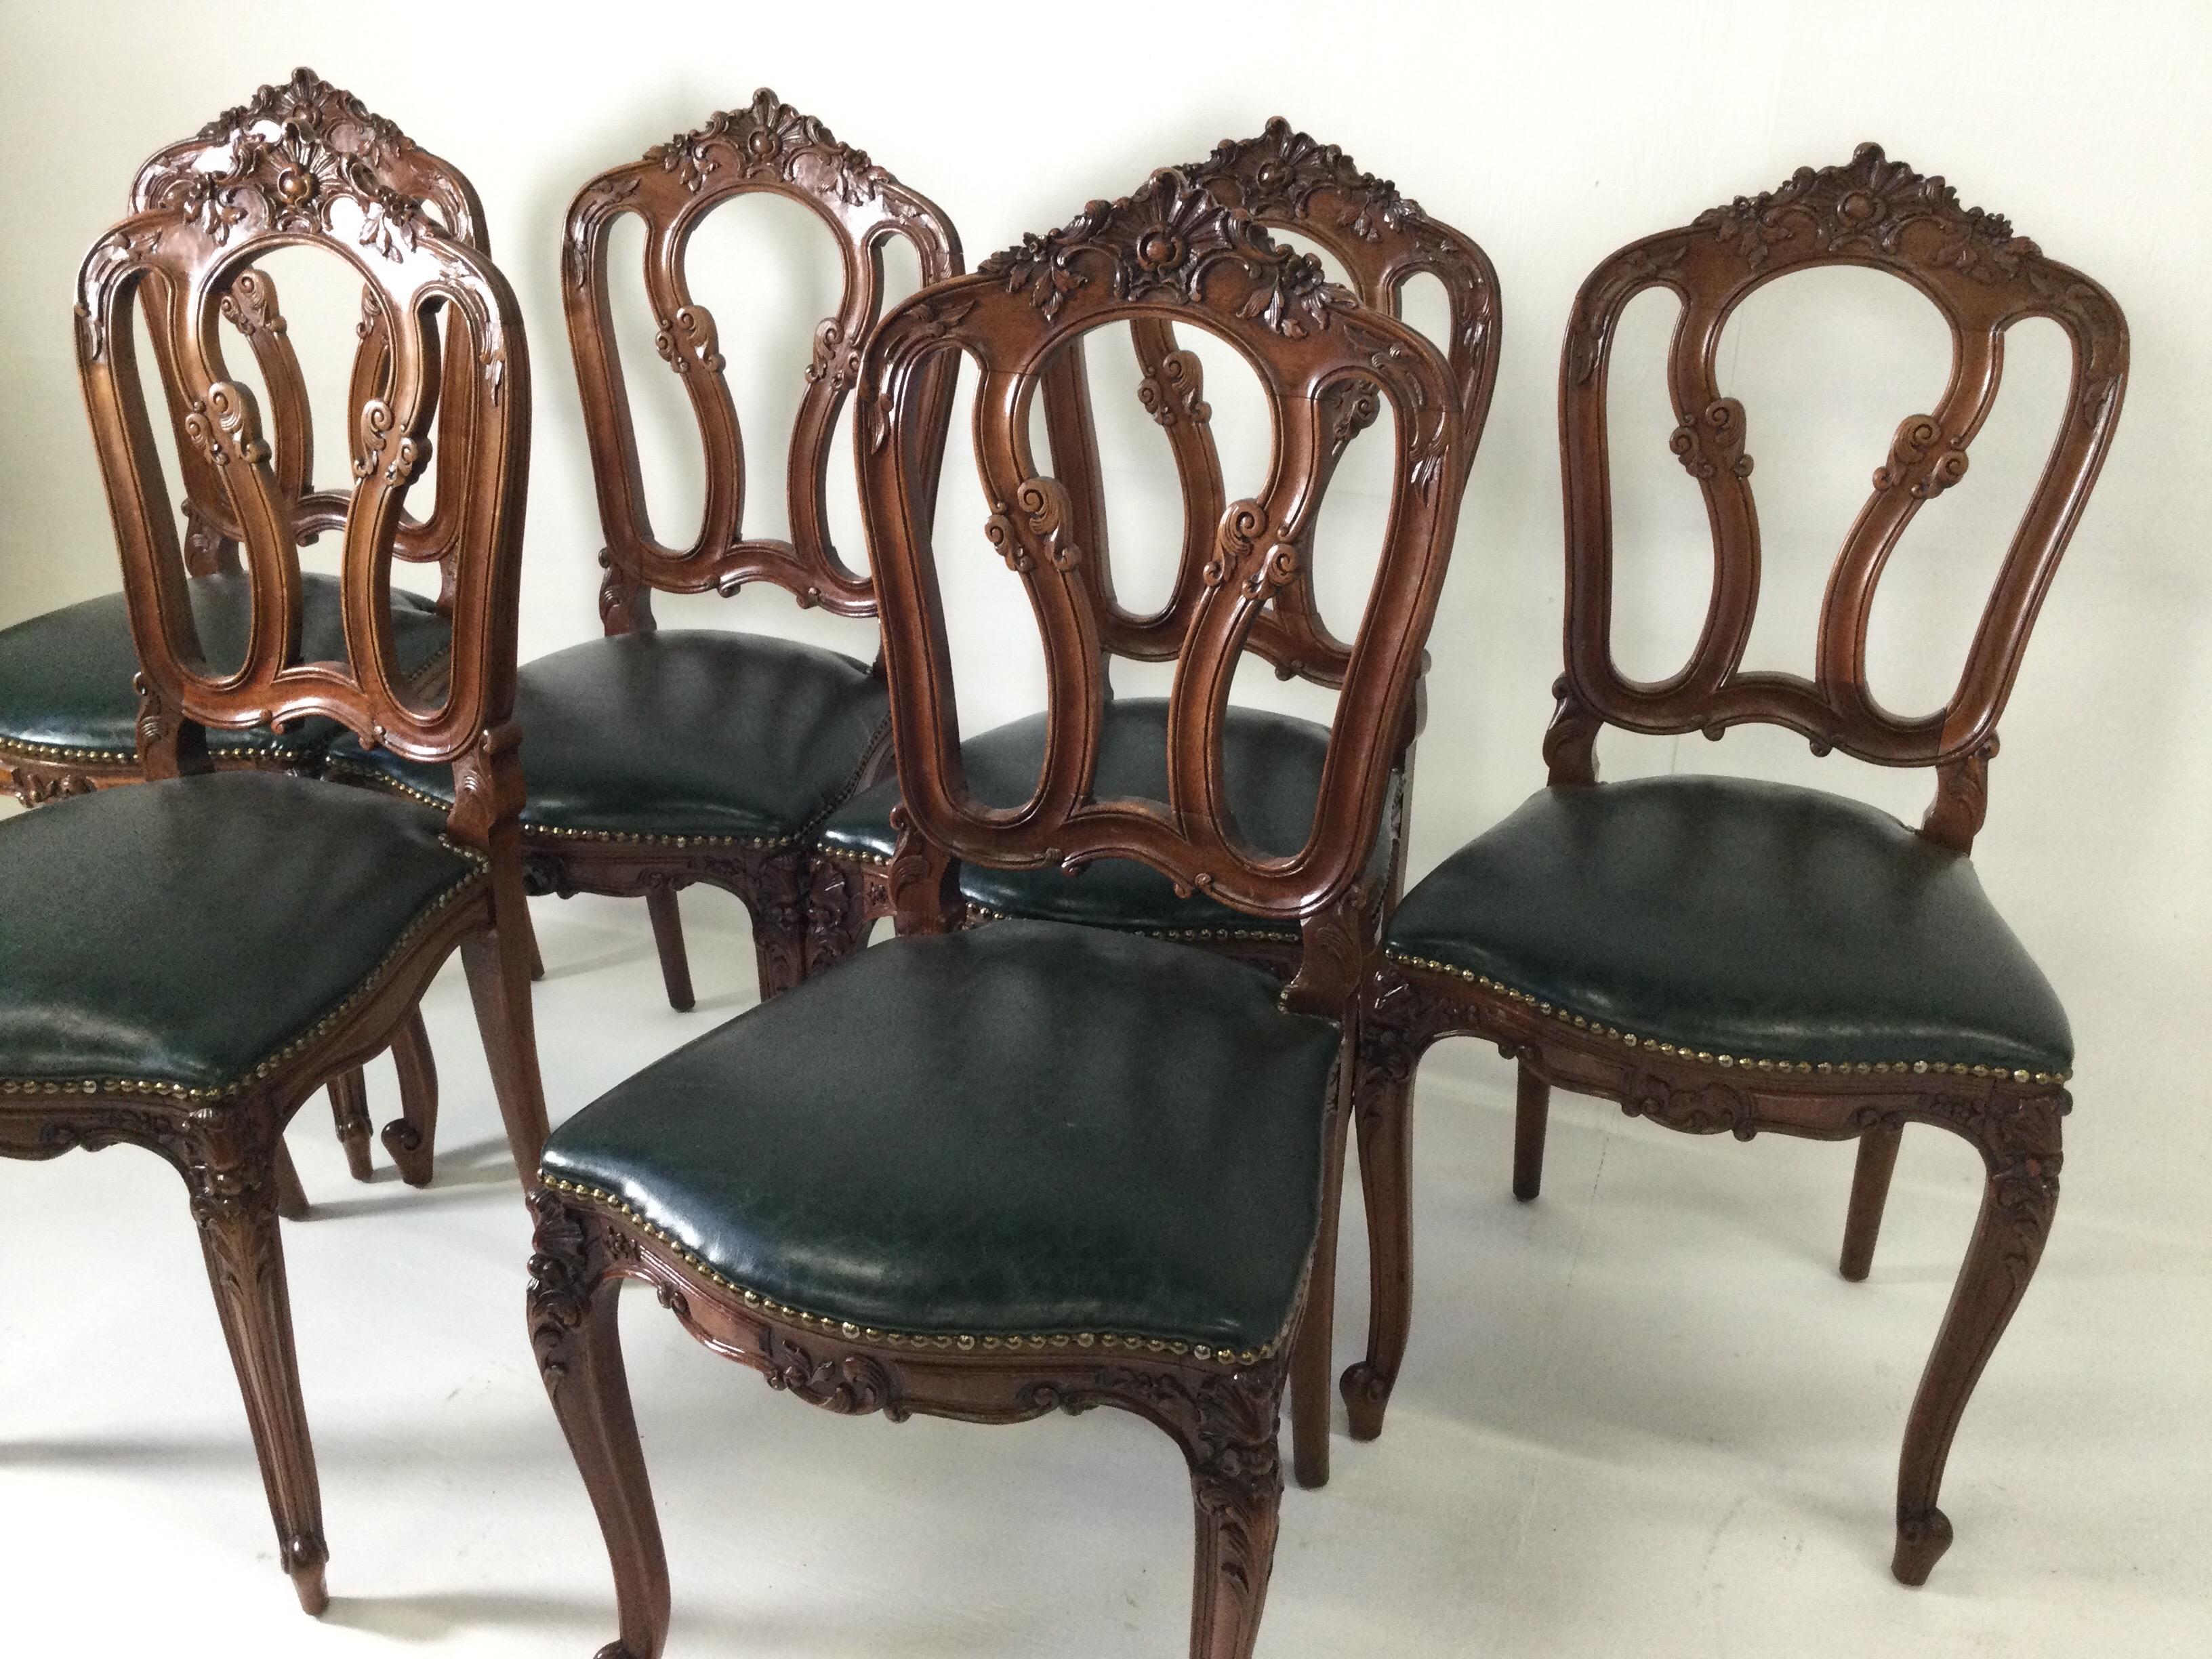 French Provincial Set of Six Carved French Style Walnut Chairs with Green Leather Seats circa 1900